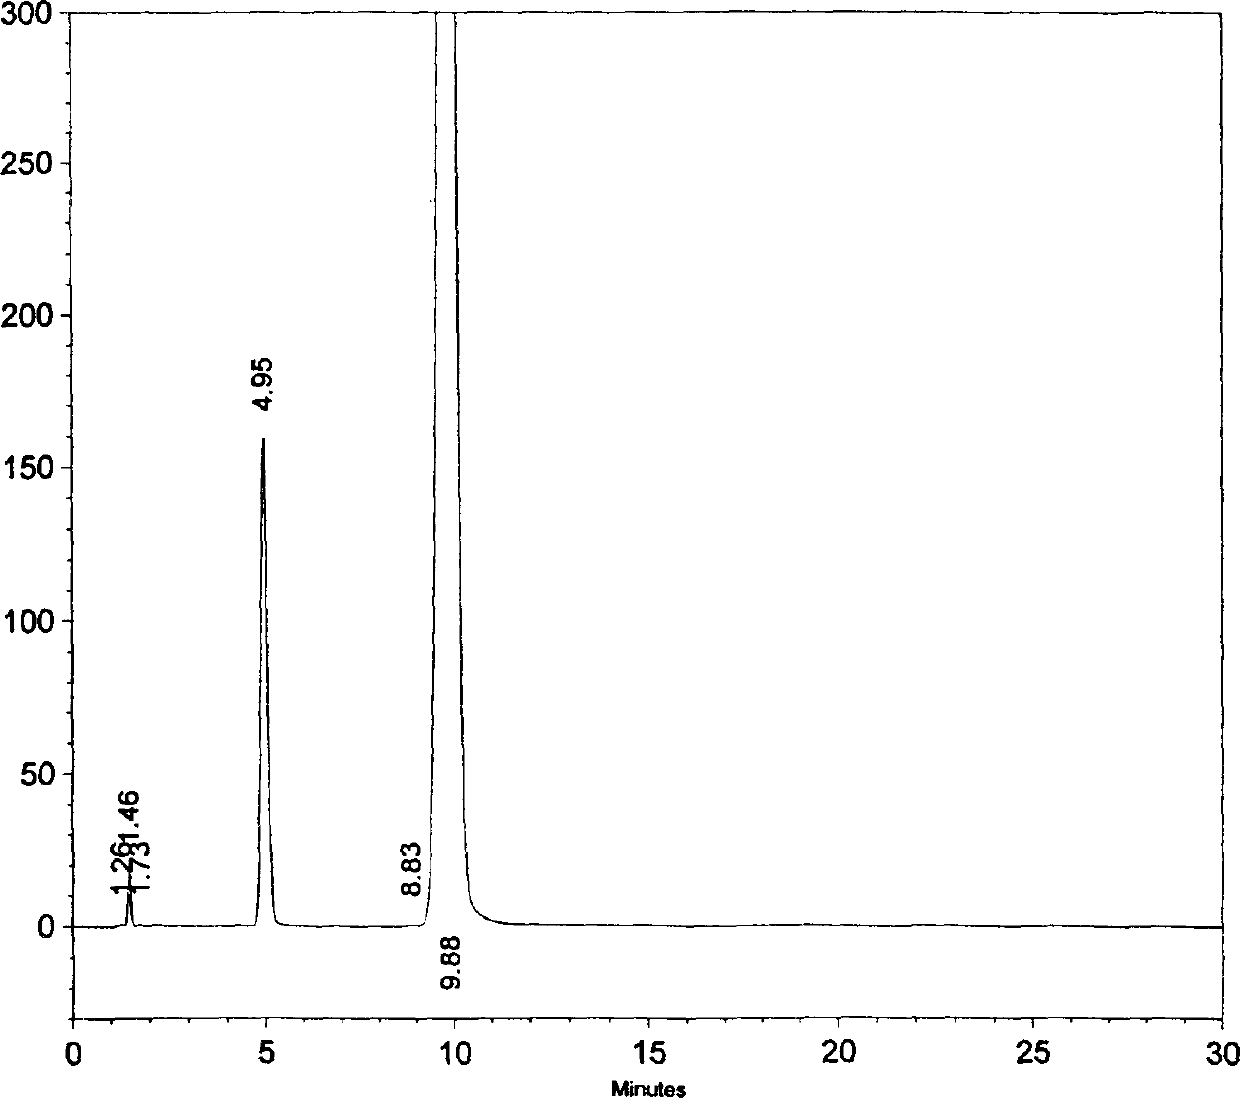 Pharmaceutical composition containing amoxicillin trihydrate and clavulanate potassium